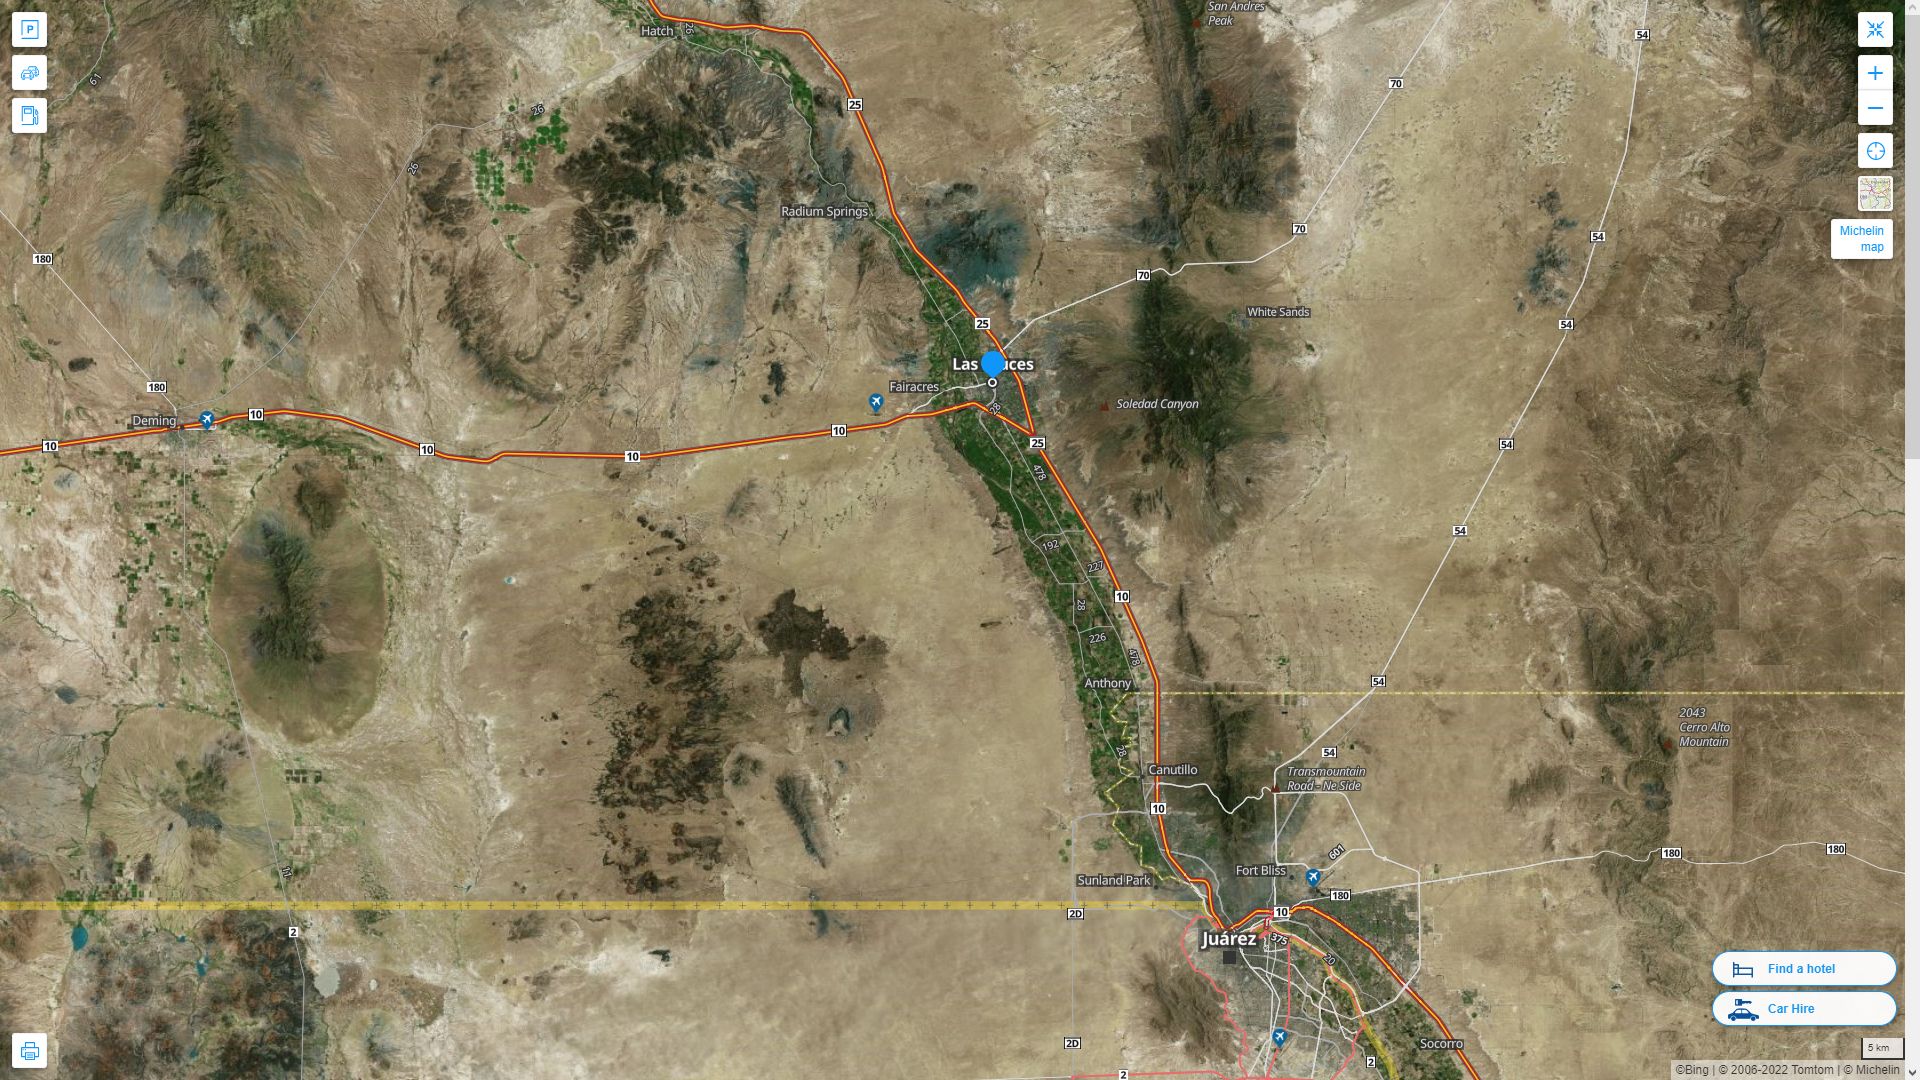 Las Cruces New Mexico Highway and Road Map with Satellite View